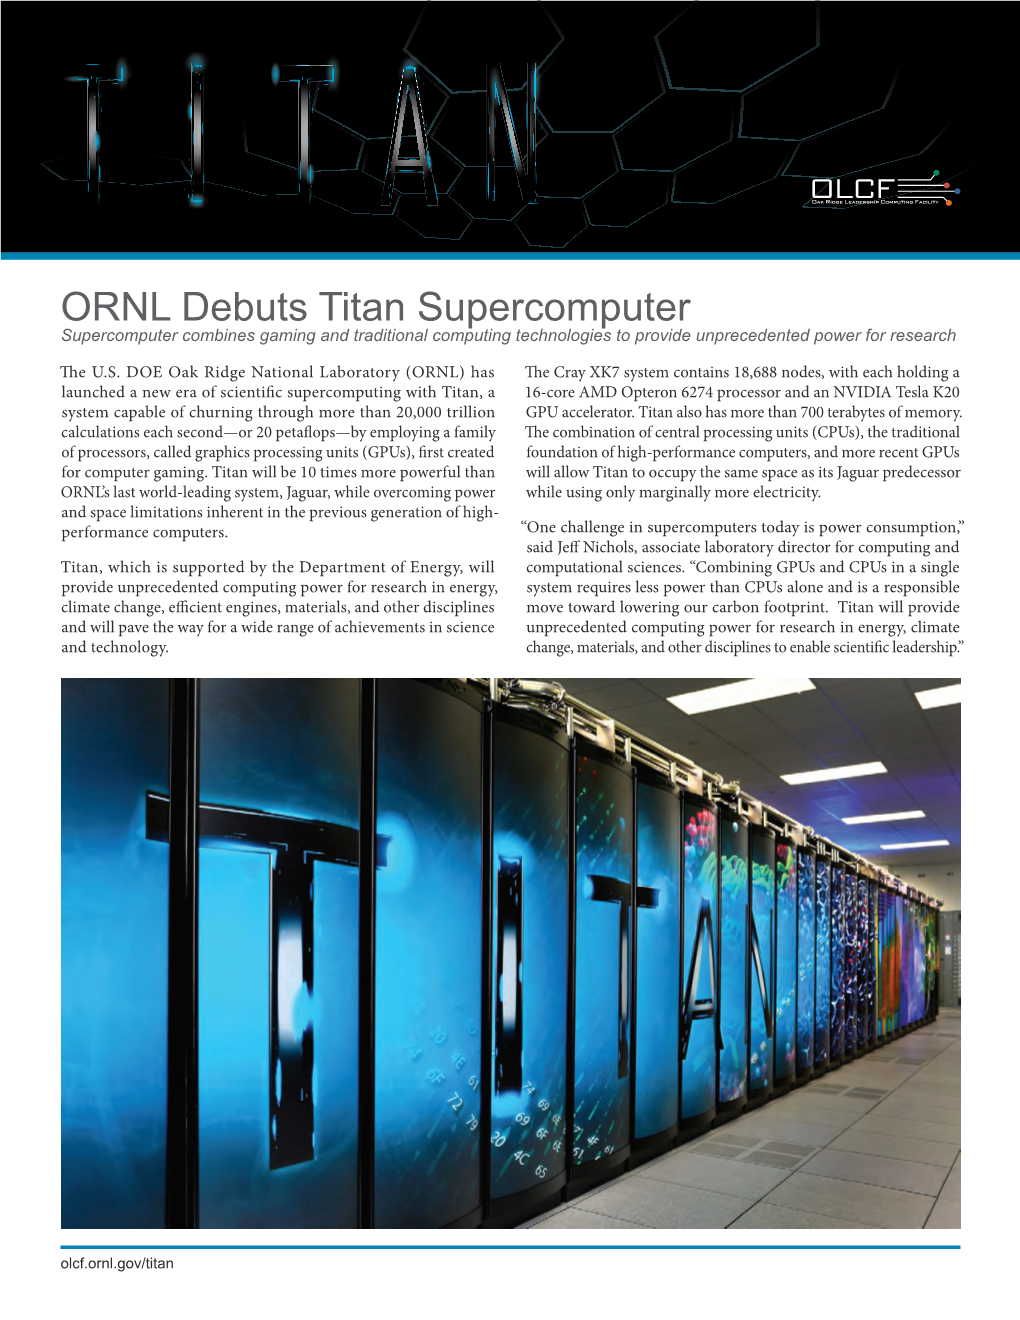 ORNL Debuts Titan Supercomputer Supercomputer Combines Gaming and Traditional Computing Technologies to Provide Unprecedented Power for Research